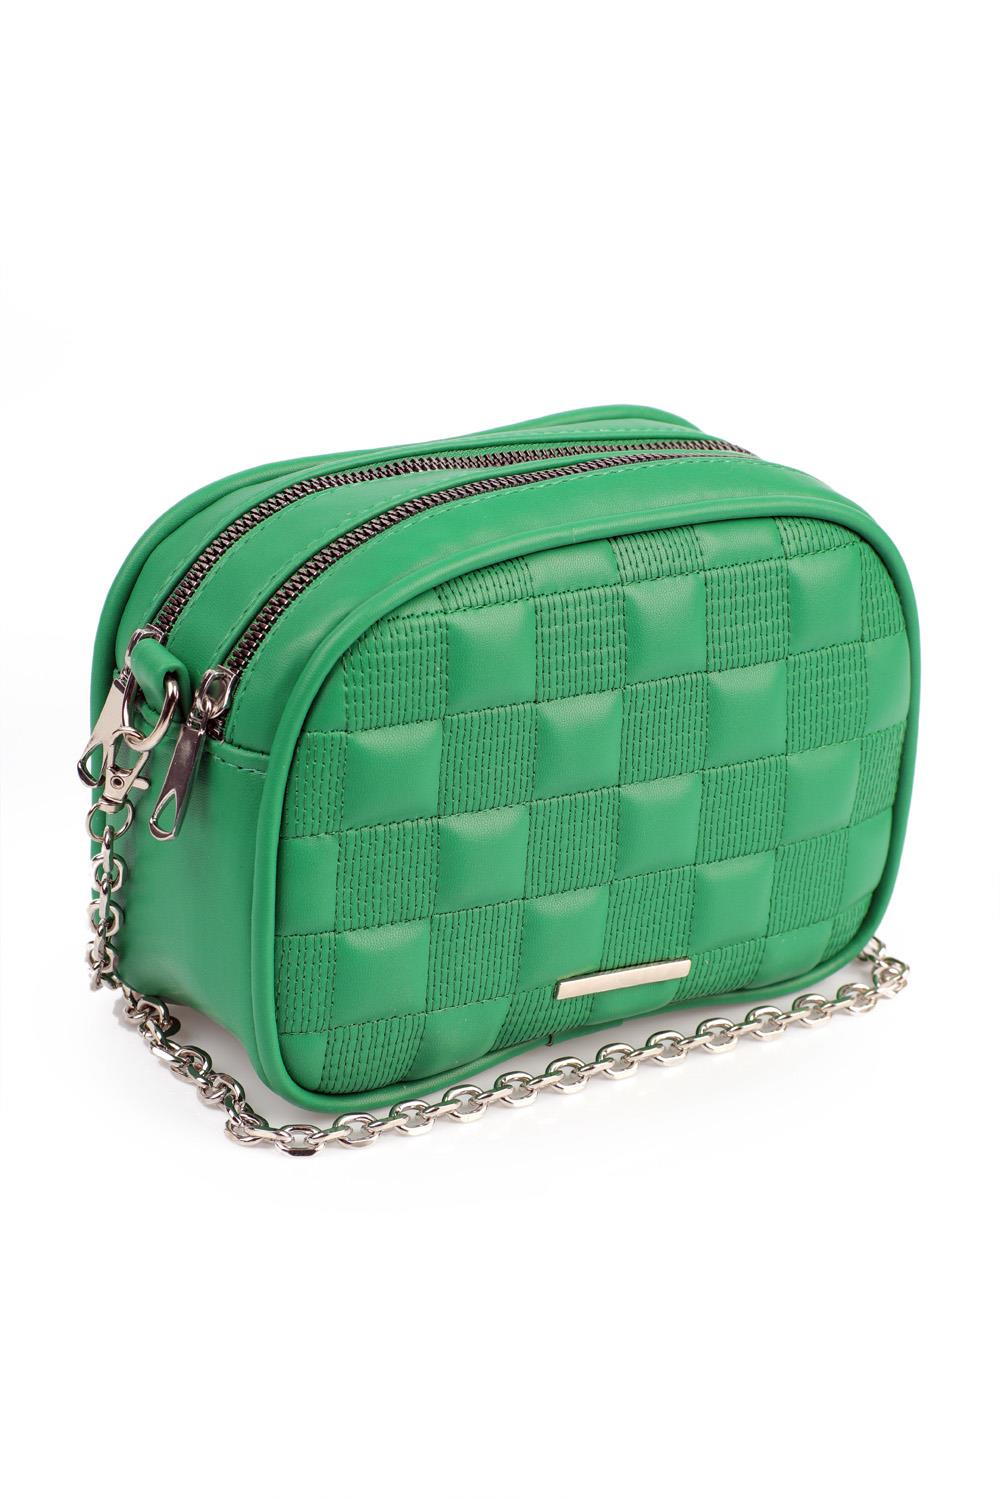 Capone Outfitters Lbz Women Green Crossbody Bag